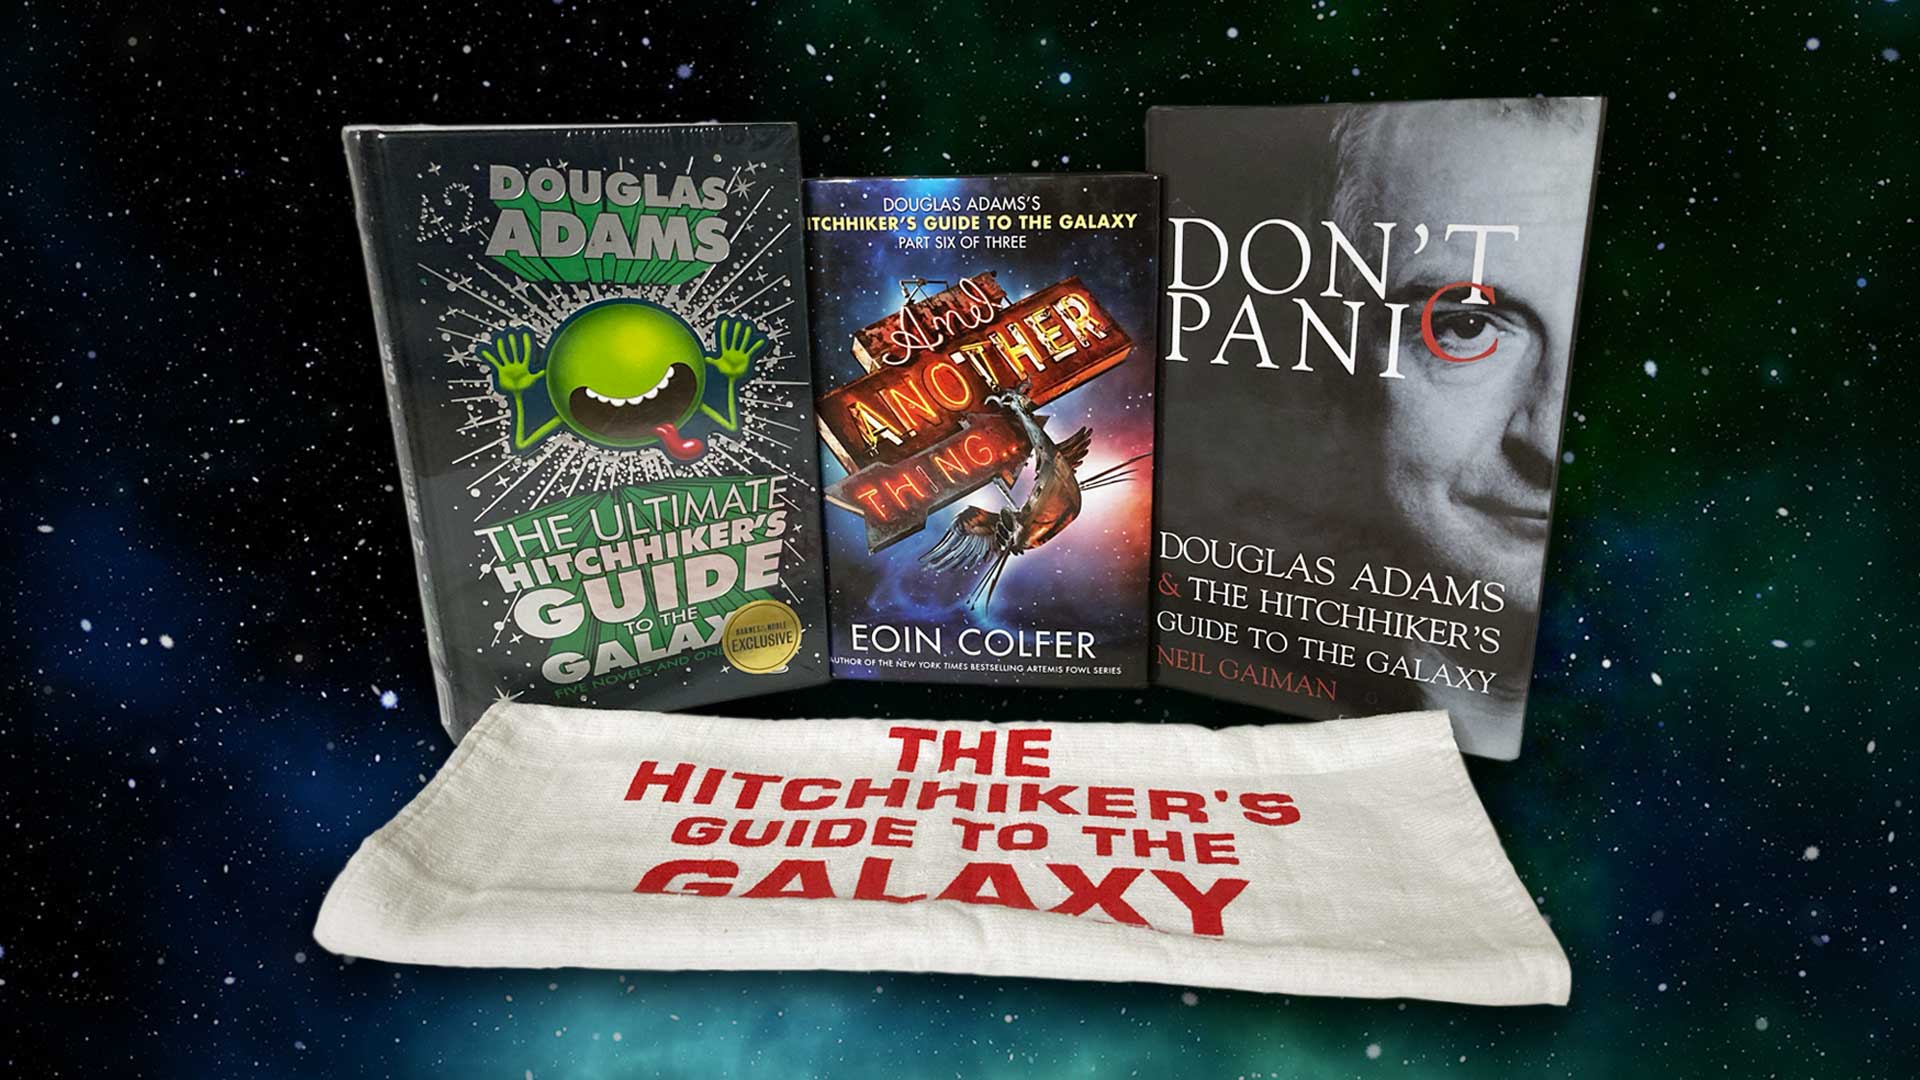 The hitchhiker's guide to the galaxy.